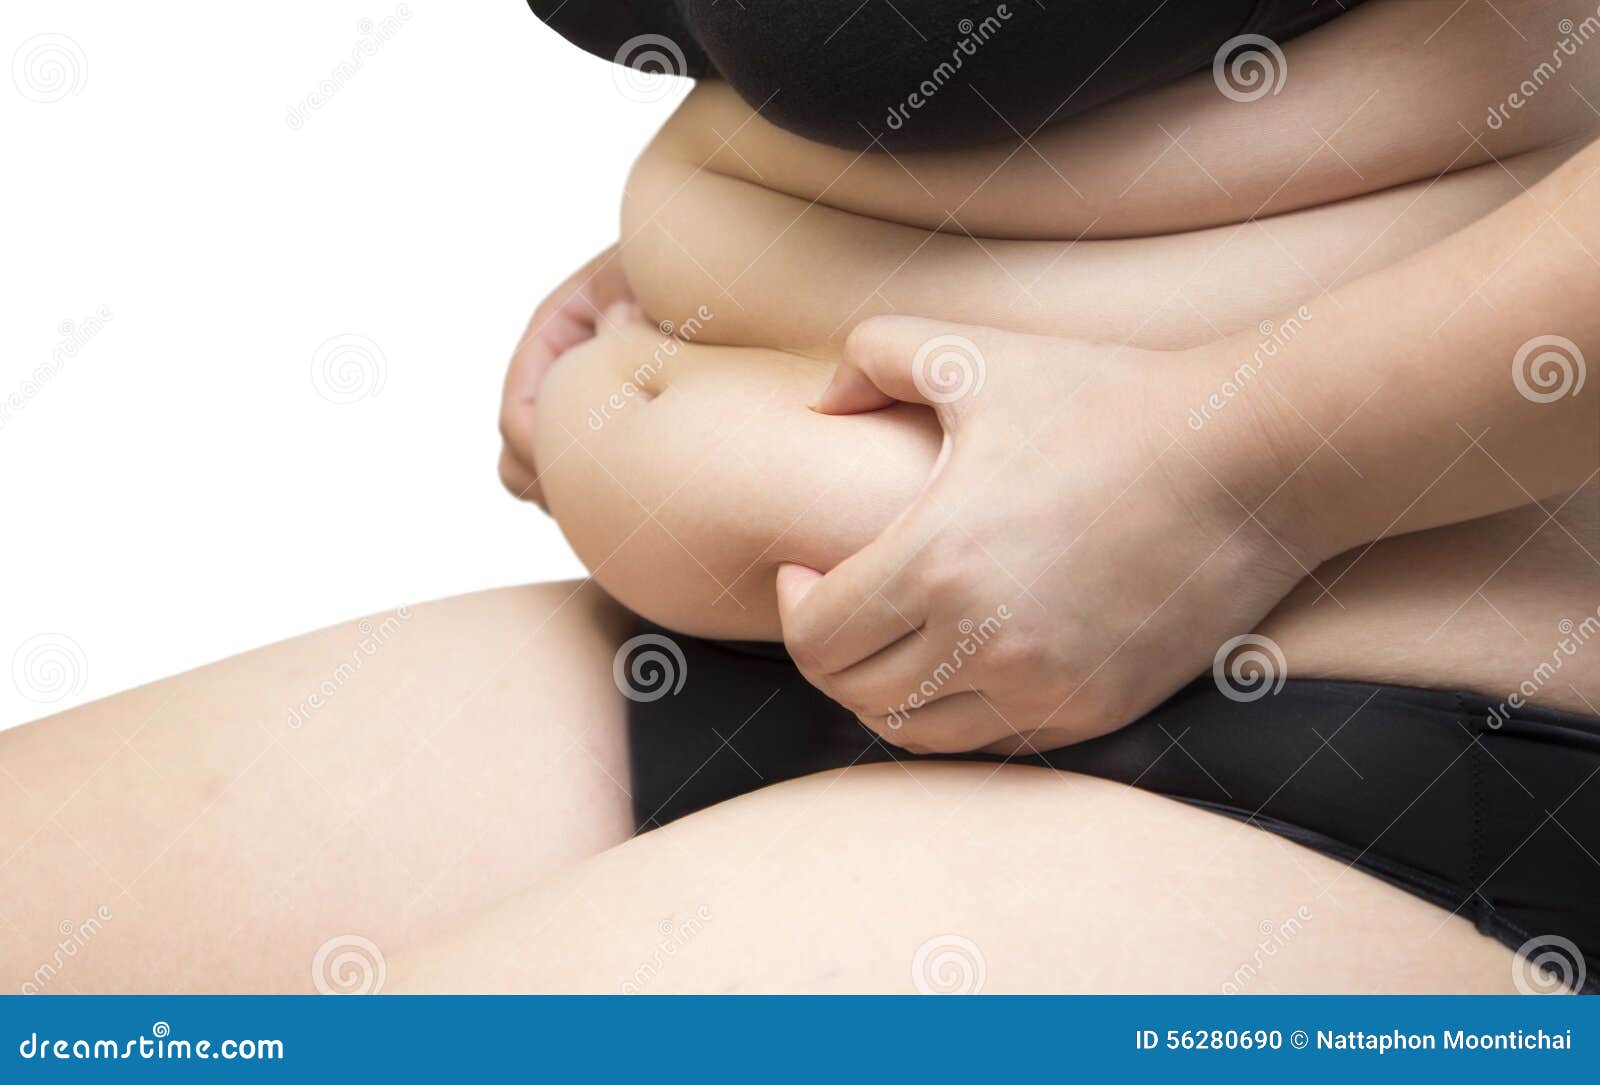 Woman Squeeze Belly Fat Wearing Black Underwear Bra and Pant on White  Isolated Stock Image - Image of healthy, female: 56280855